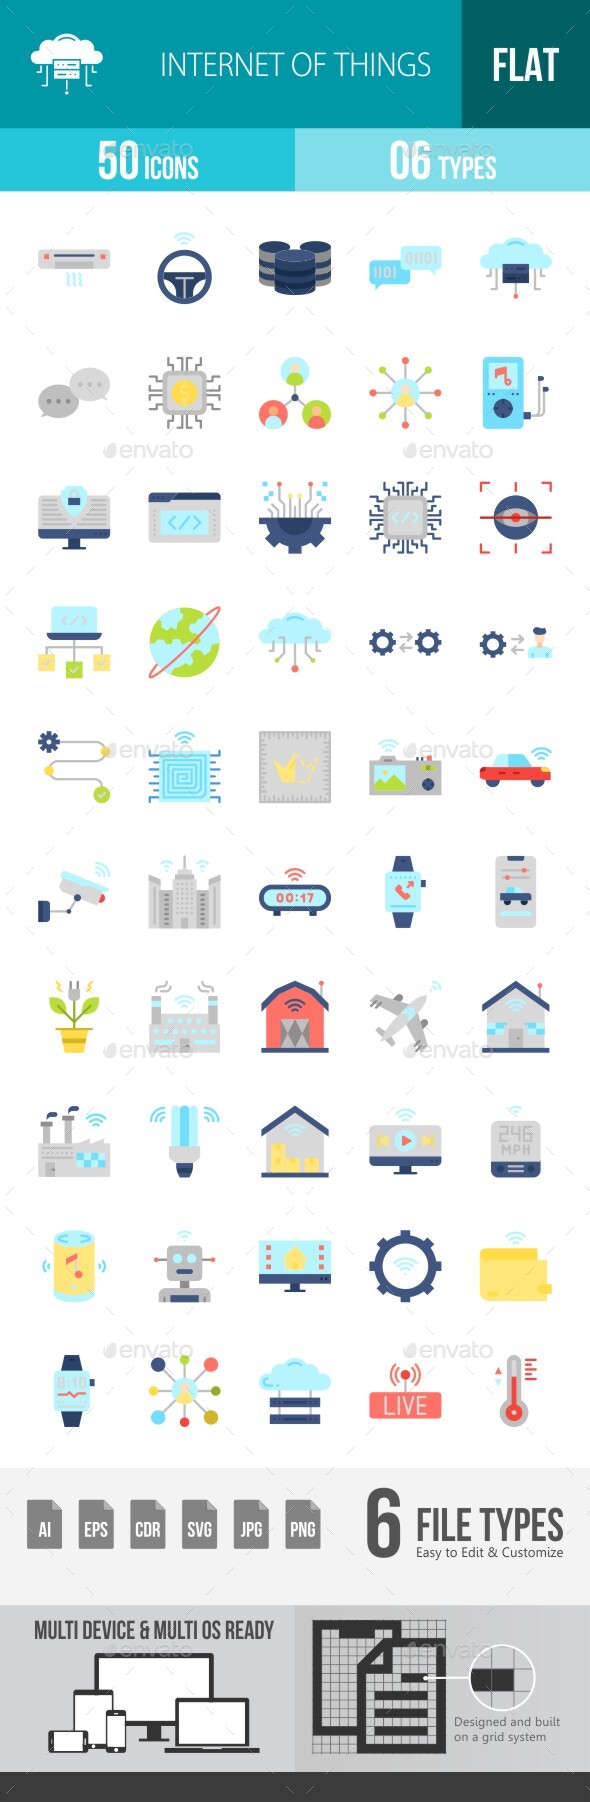 [DOWNLOAD]Internet Of Things Flat Multicolor Icons